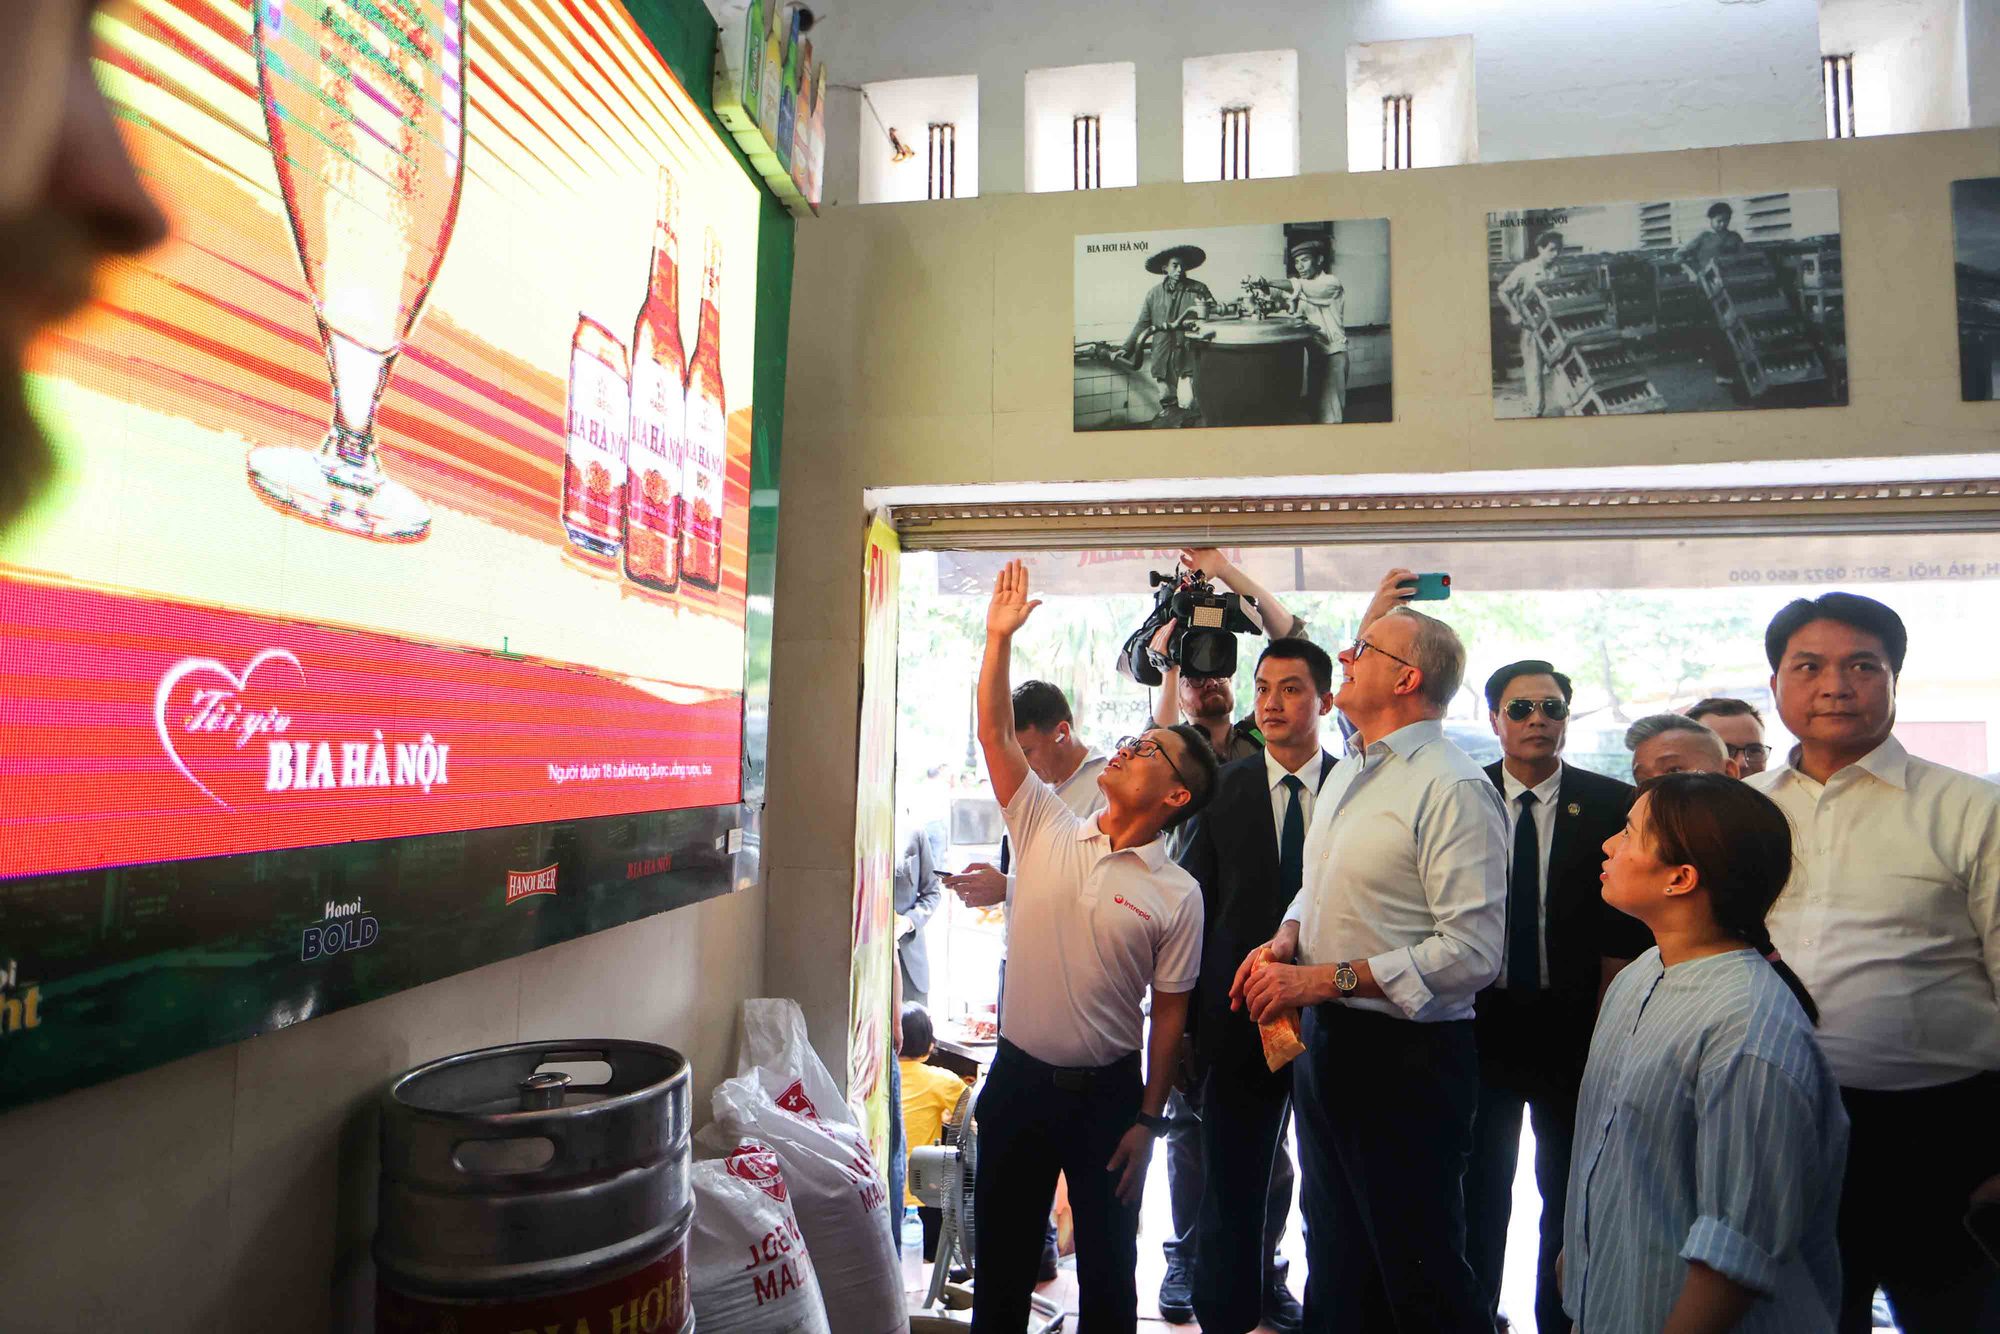 A representative of the Vietnam-based brewer Habeco briefs PM Albanese on the history and development of Hanoi draft beer